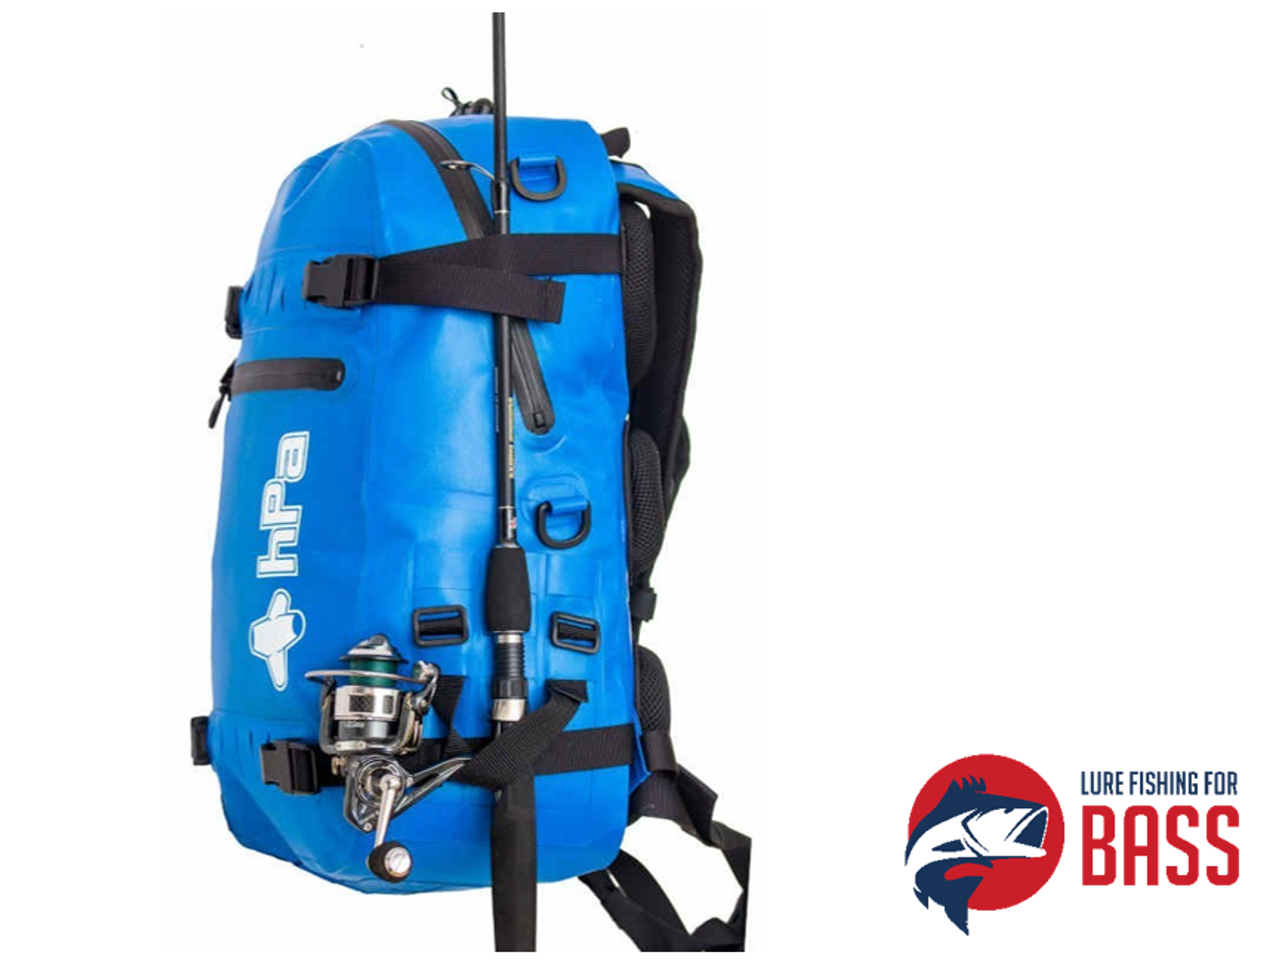 https://cdn11.bigcommerce.com/s-h9hha4a/images/stencil/1280x1280/products/5013/16508/HPA_Infladry_25_Waterproof_Backpack_Royal_Blue__31326.1563300831.png?c=2